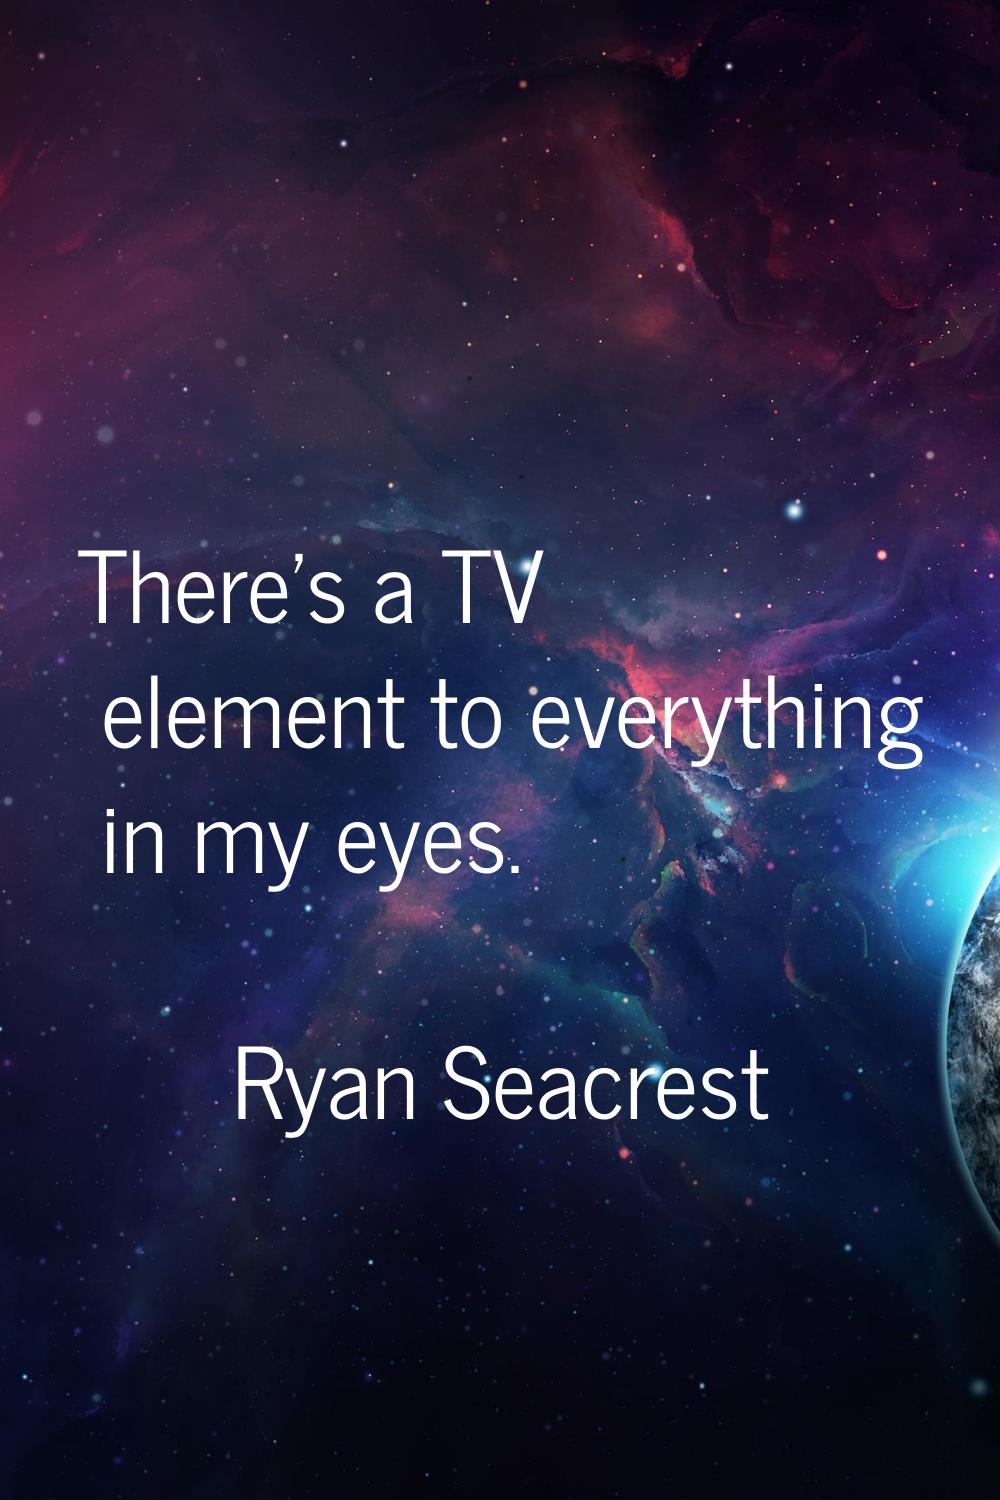 There's a TV element to everything in my eyes.